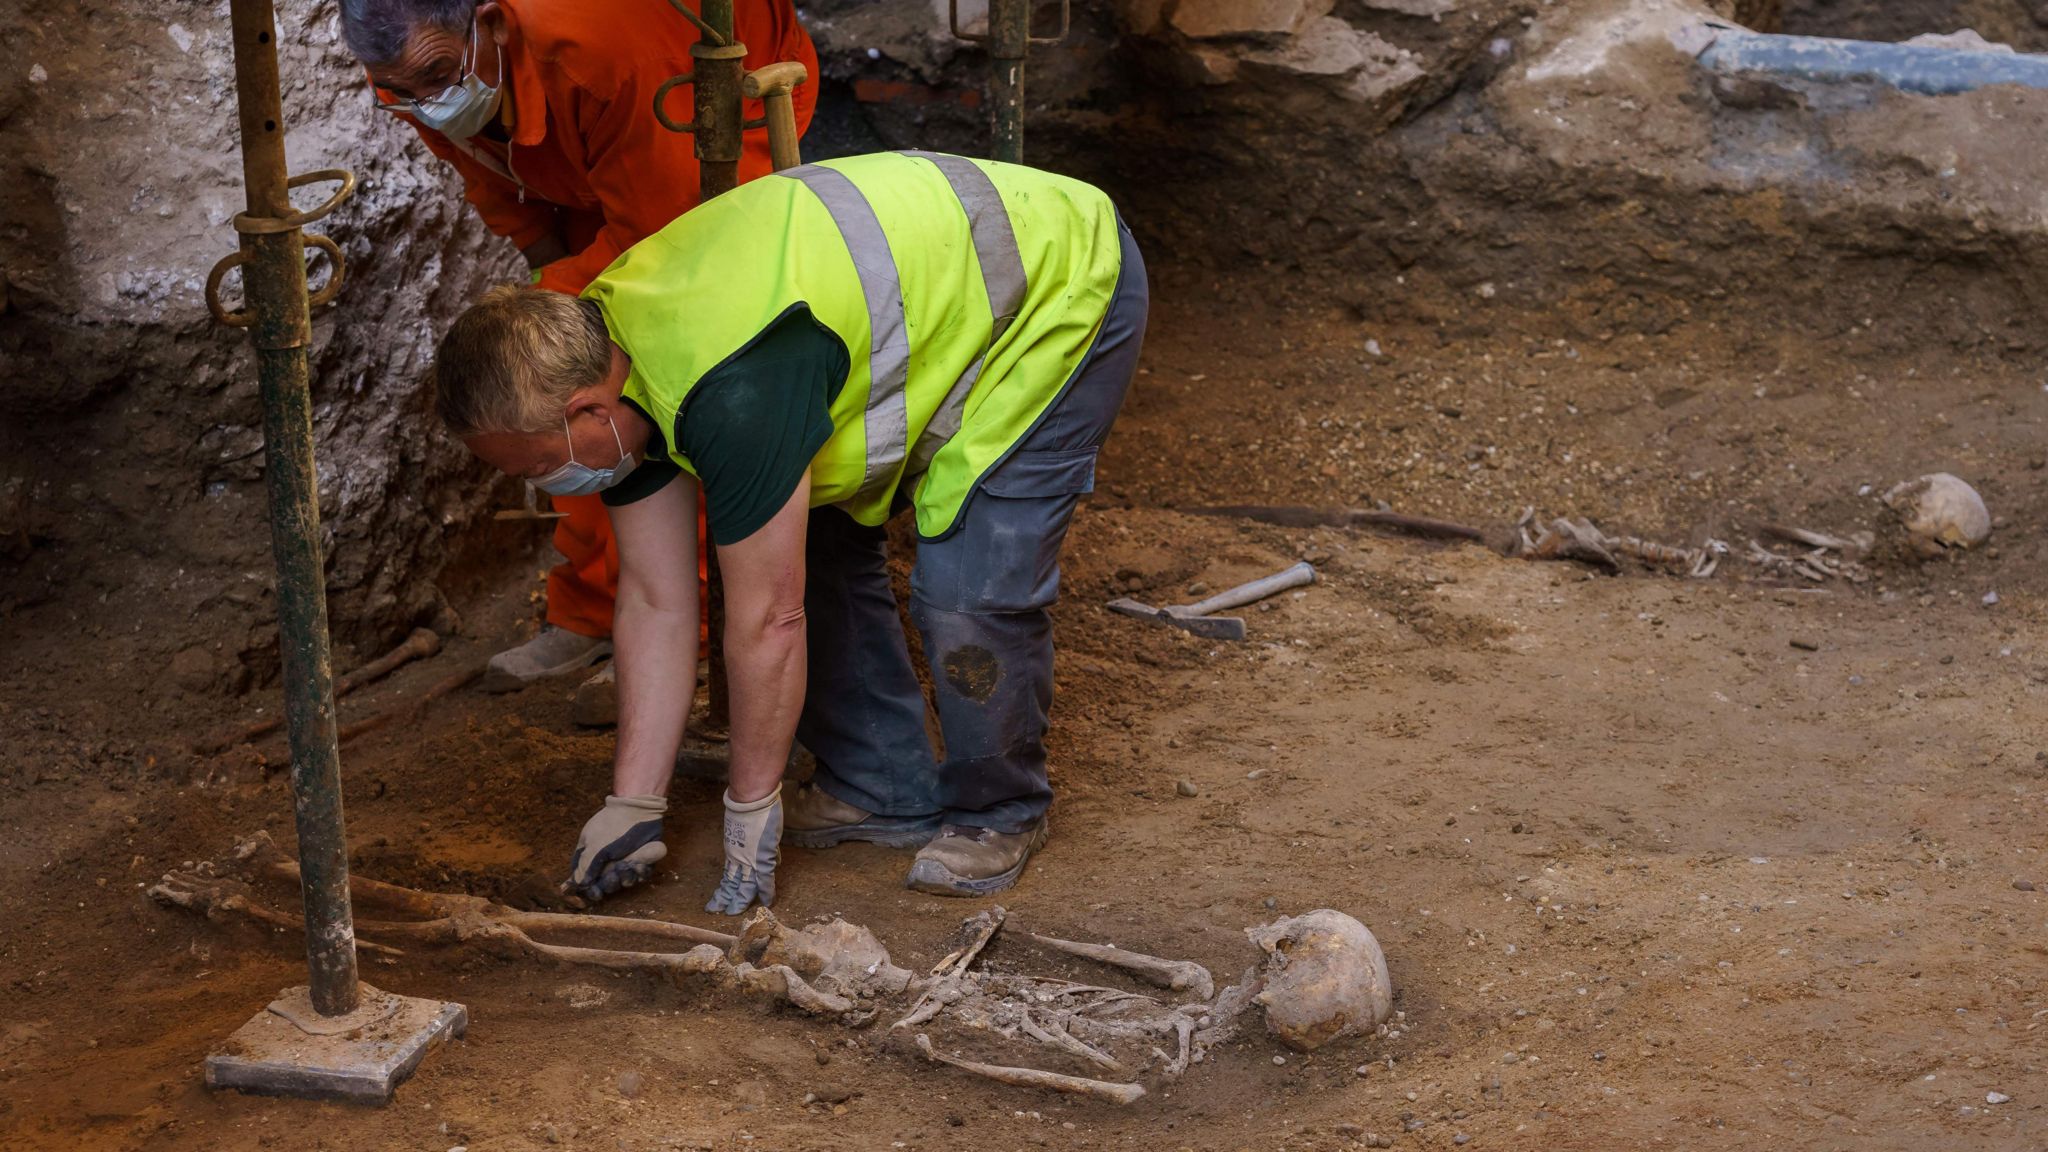 Skeletons were found in the ruins of the Chapel of Marvels in Valladolid in 2020